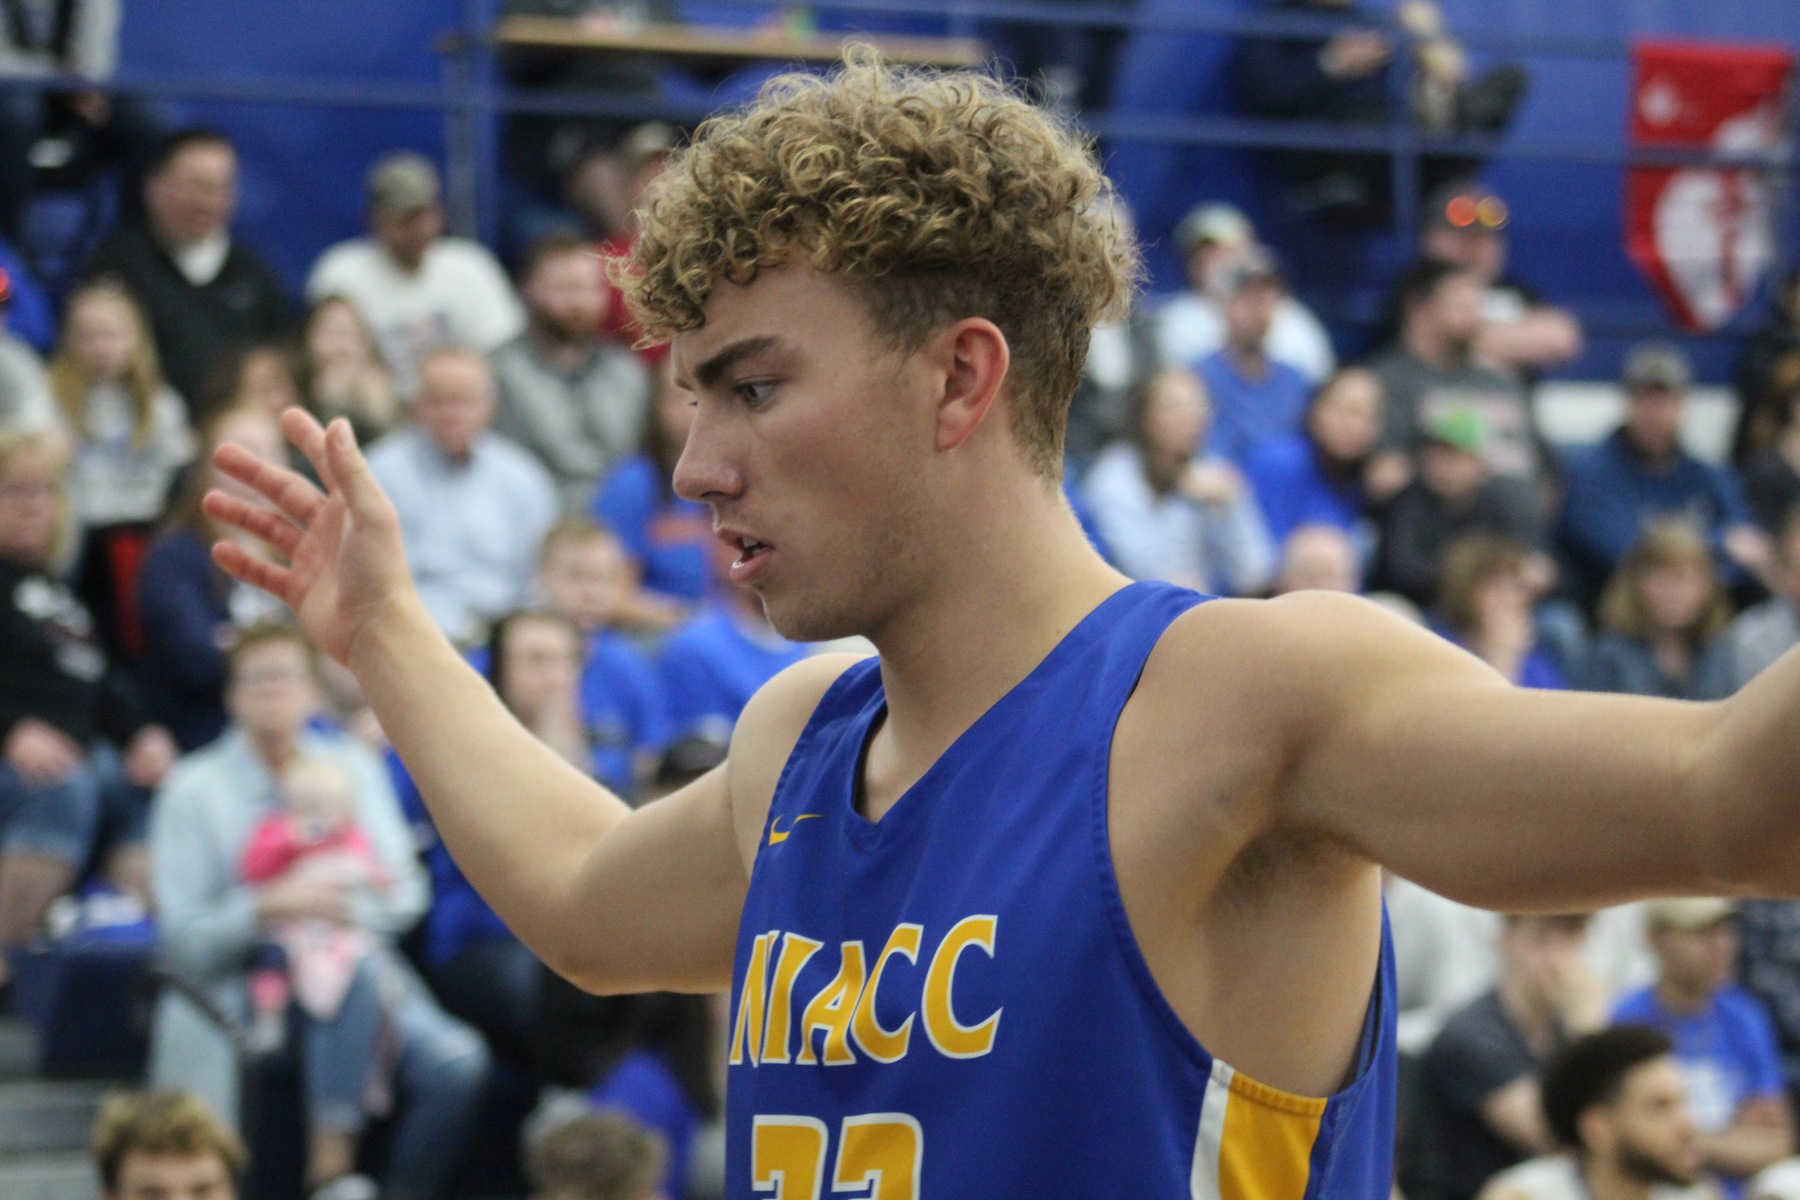 NIACC's Chandler Dean defends during a game during the 2019-20 season.